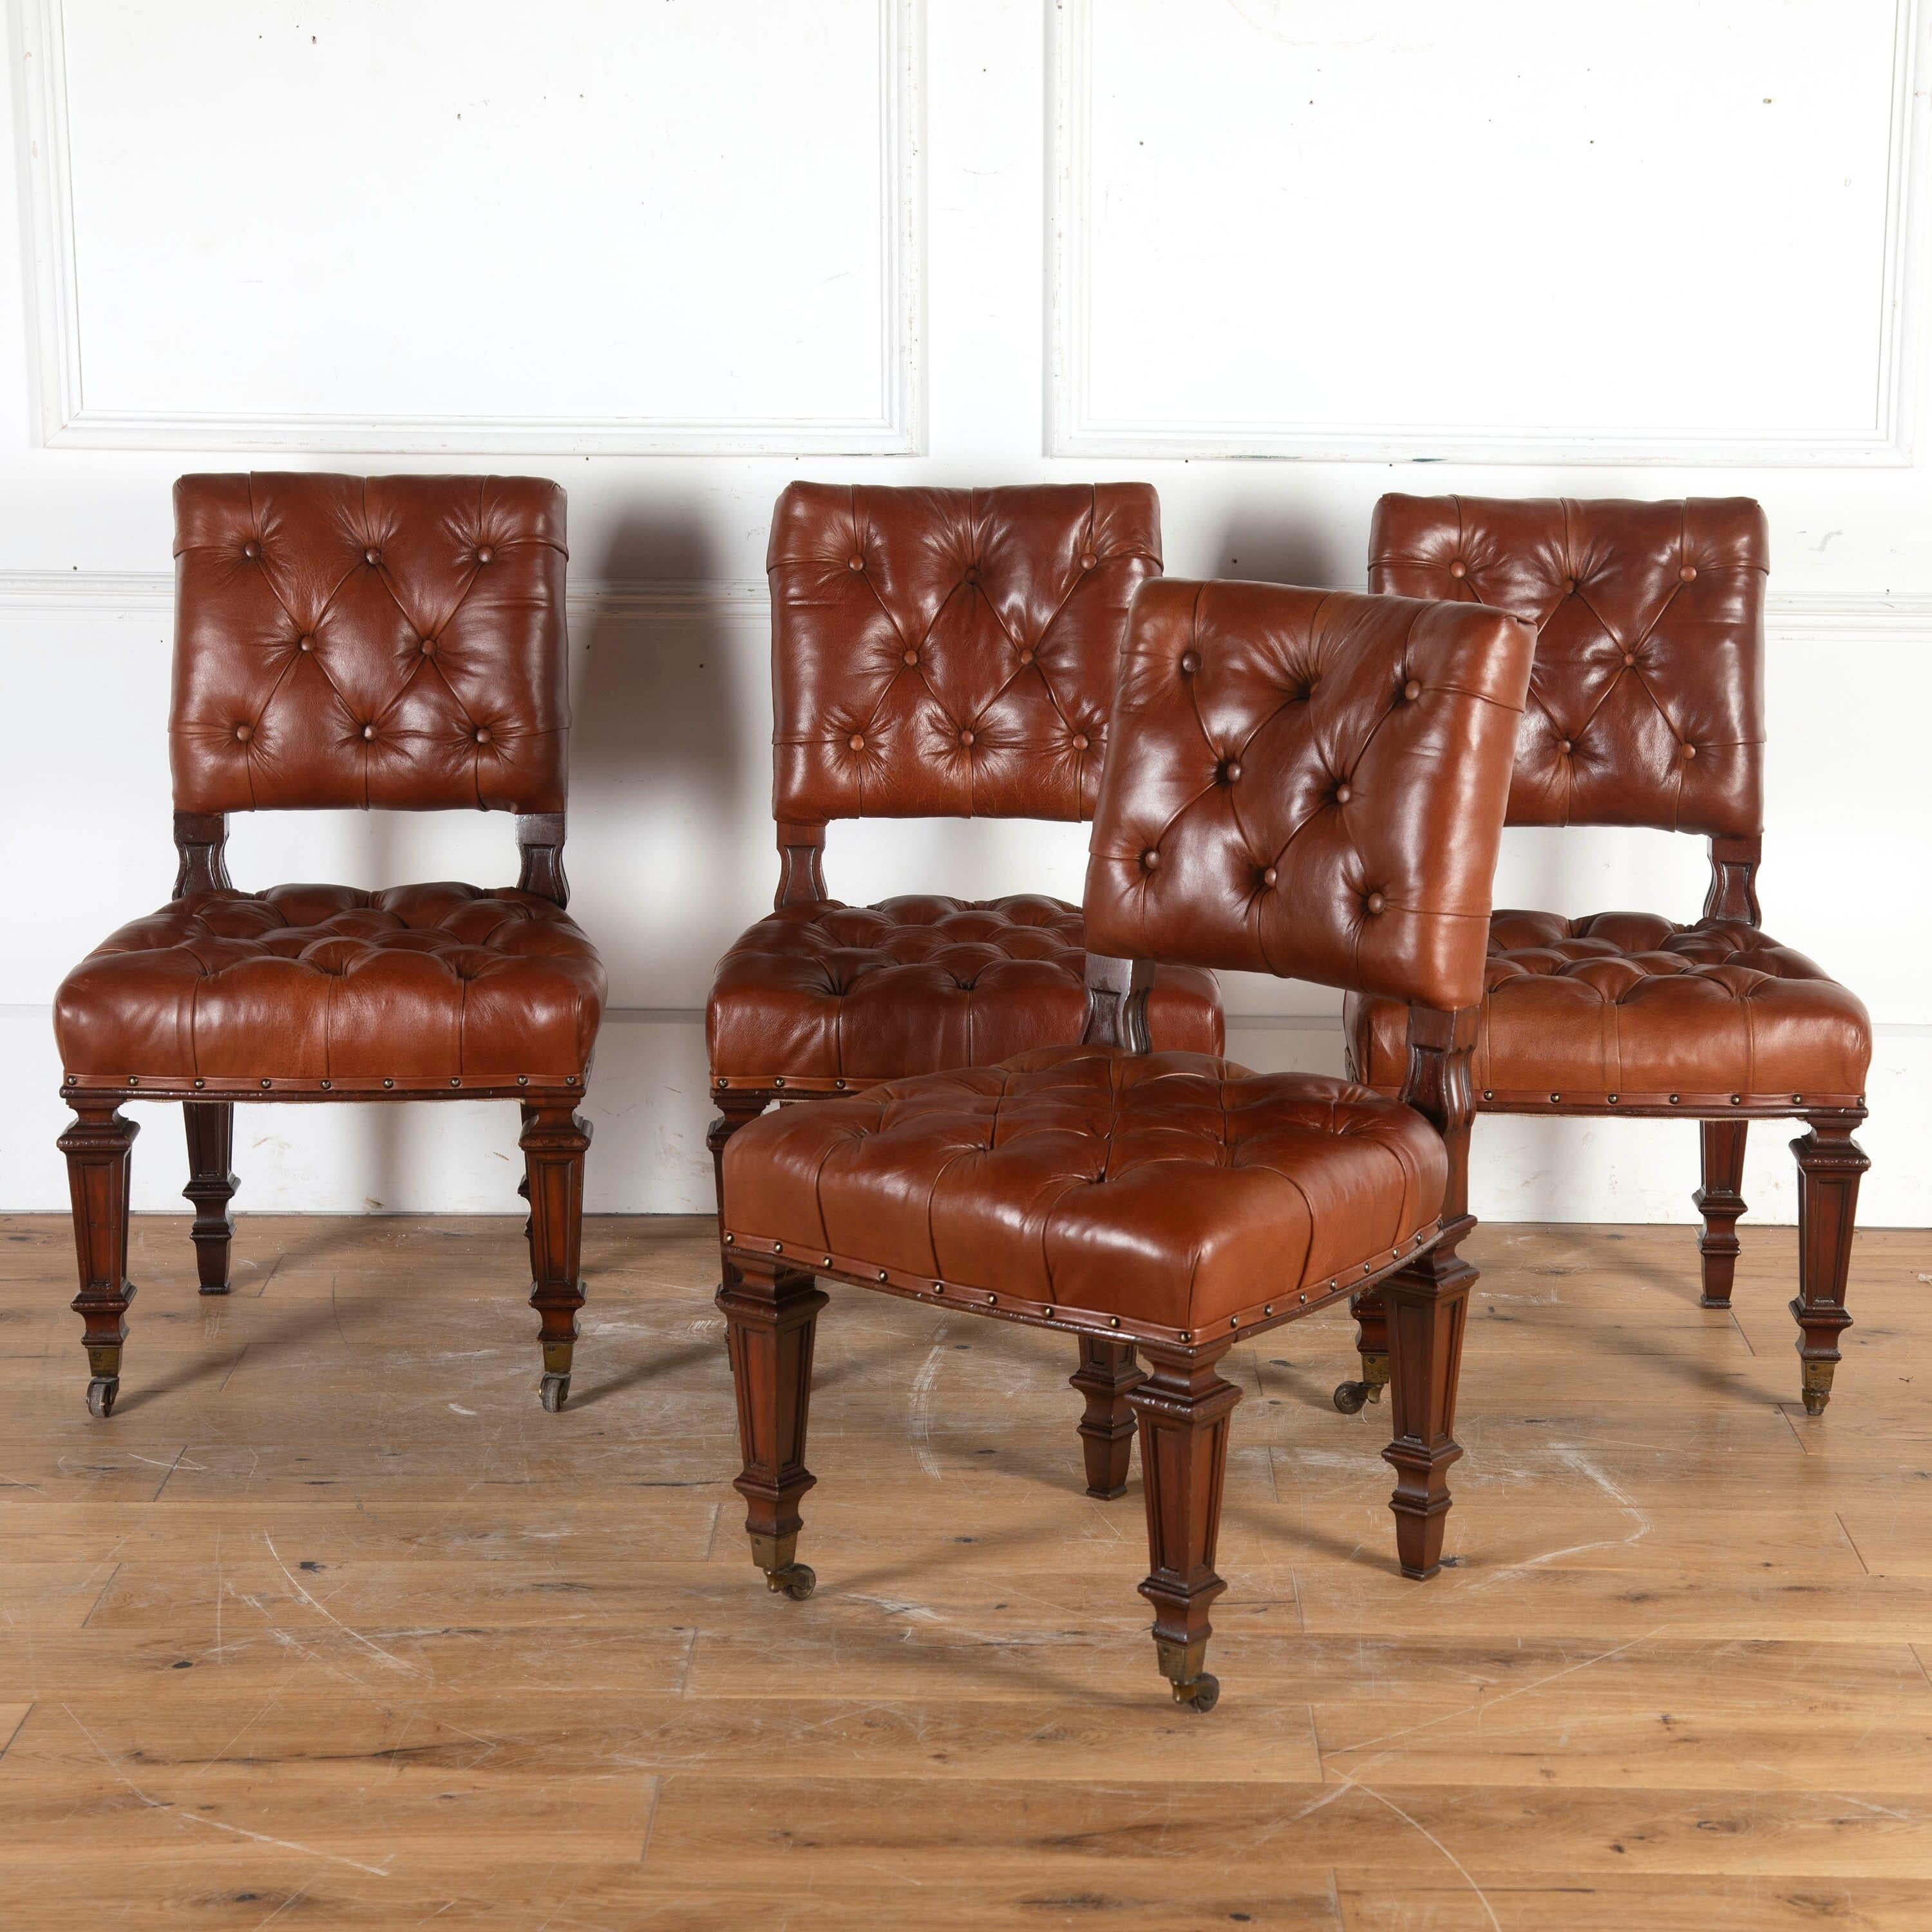 Fine quality set of four 19th century dining chairs by Holland & Sons.

These wonderful chairs feature square buttoned backs and generous seats, which have been reupholstered in an aged soft nut brown leather. 

They are supported on polished